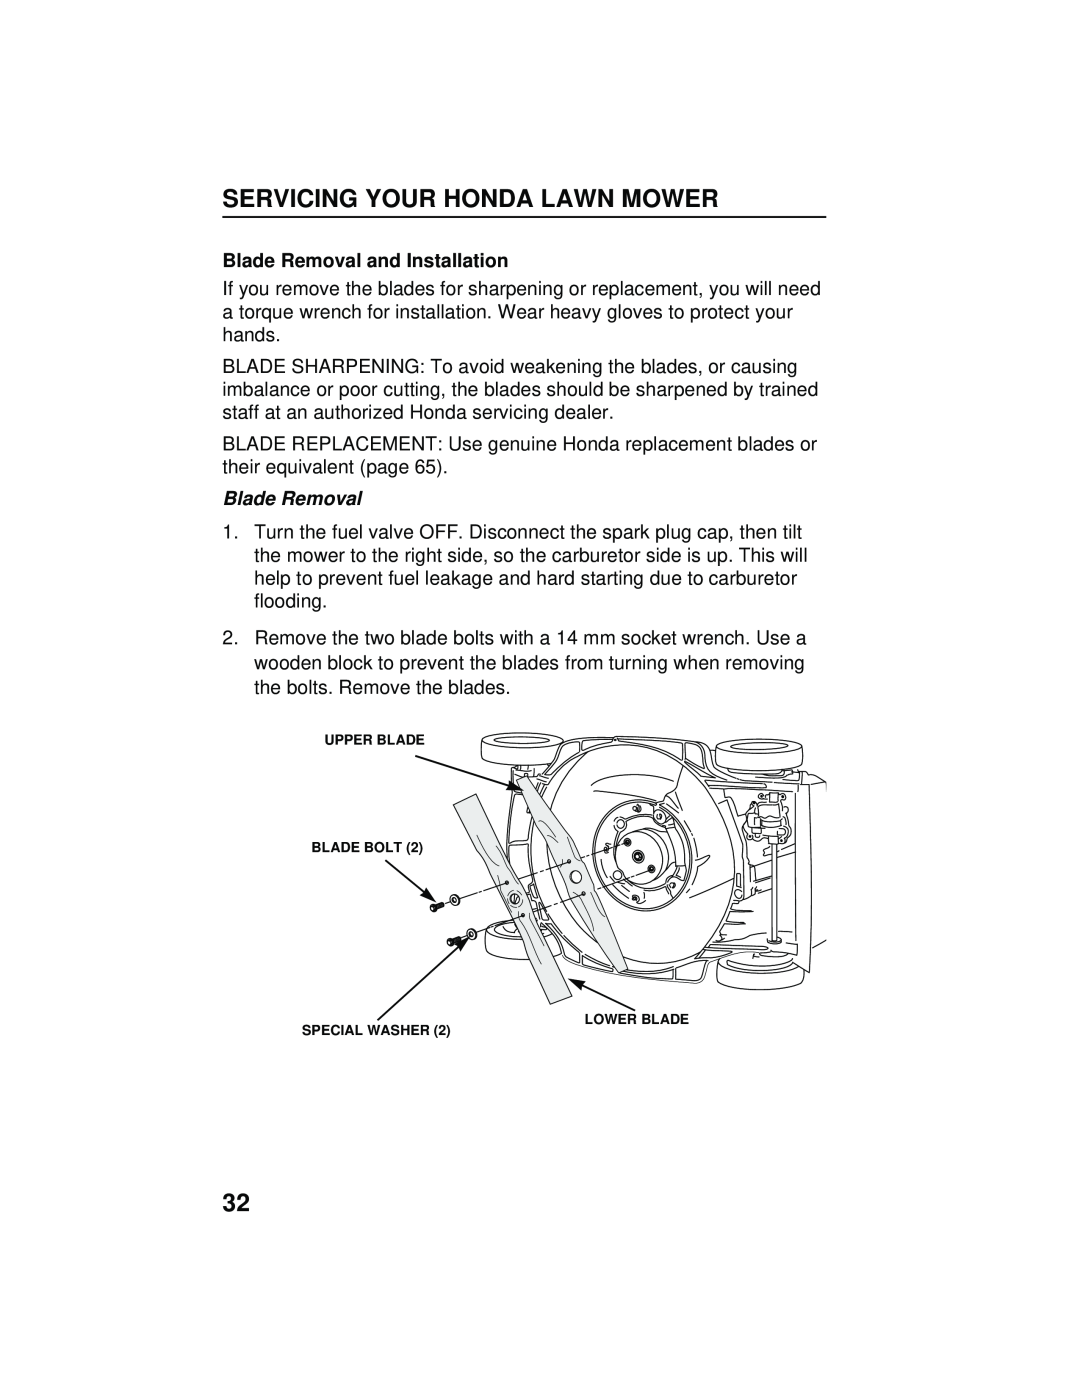 Honda Power Equipment HRB216TXA owner manual Blade Removal and Installation, Servicing Your Honda Lawn Mower 